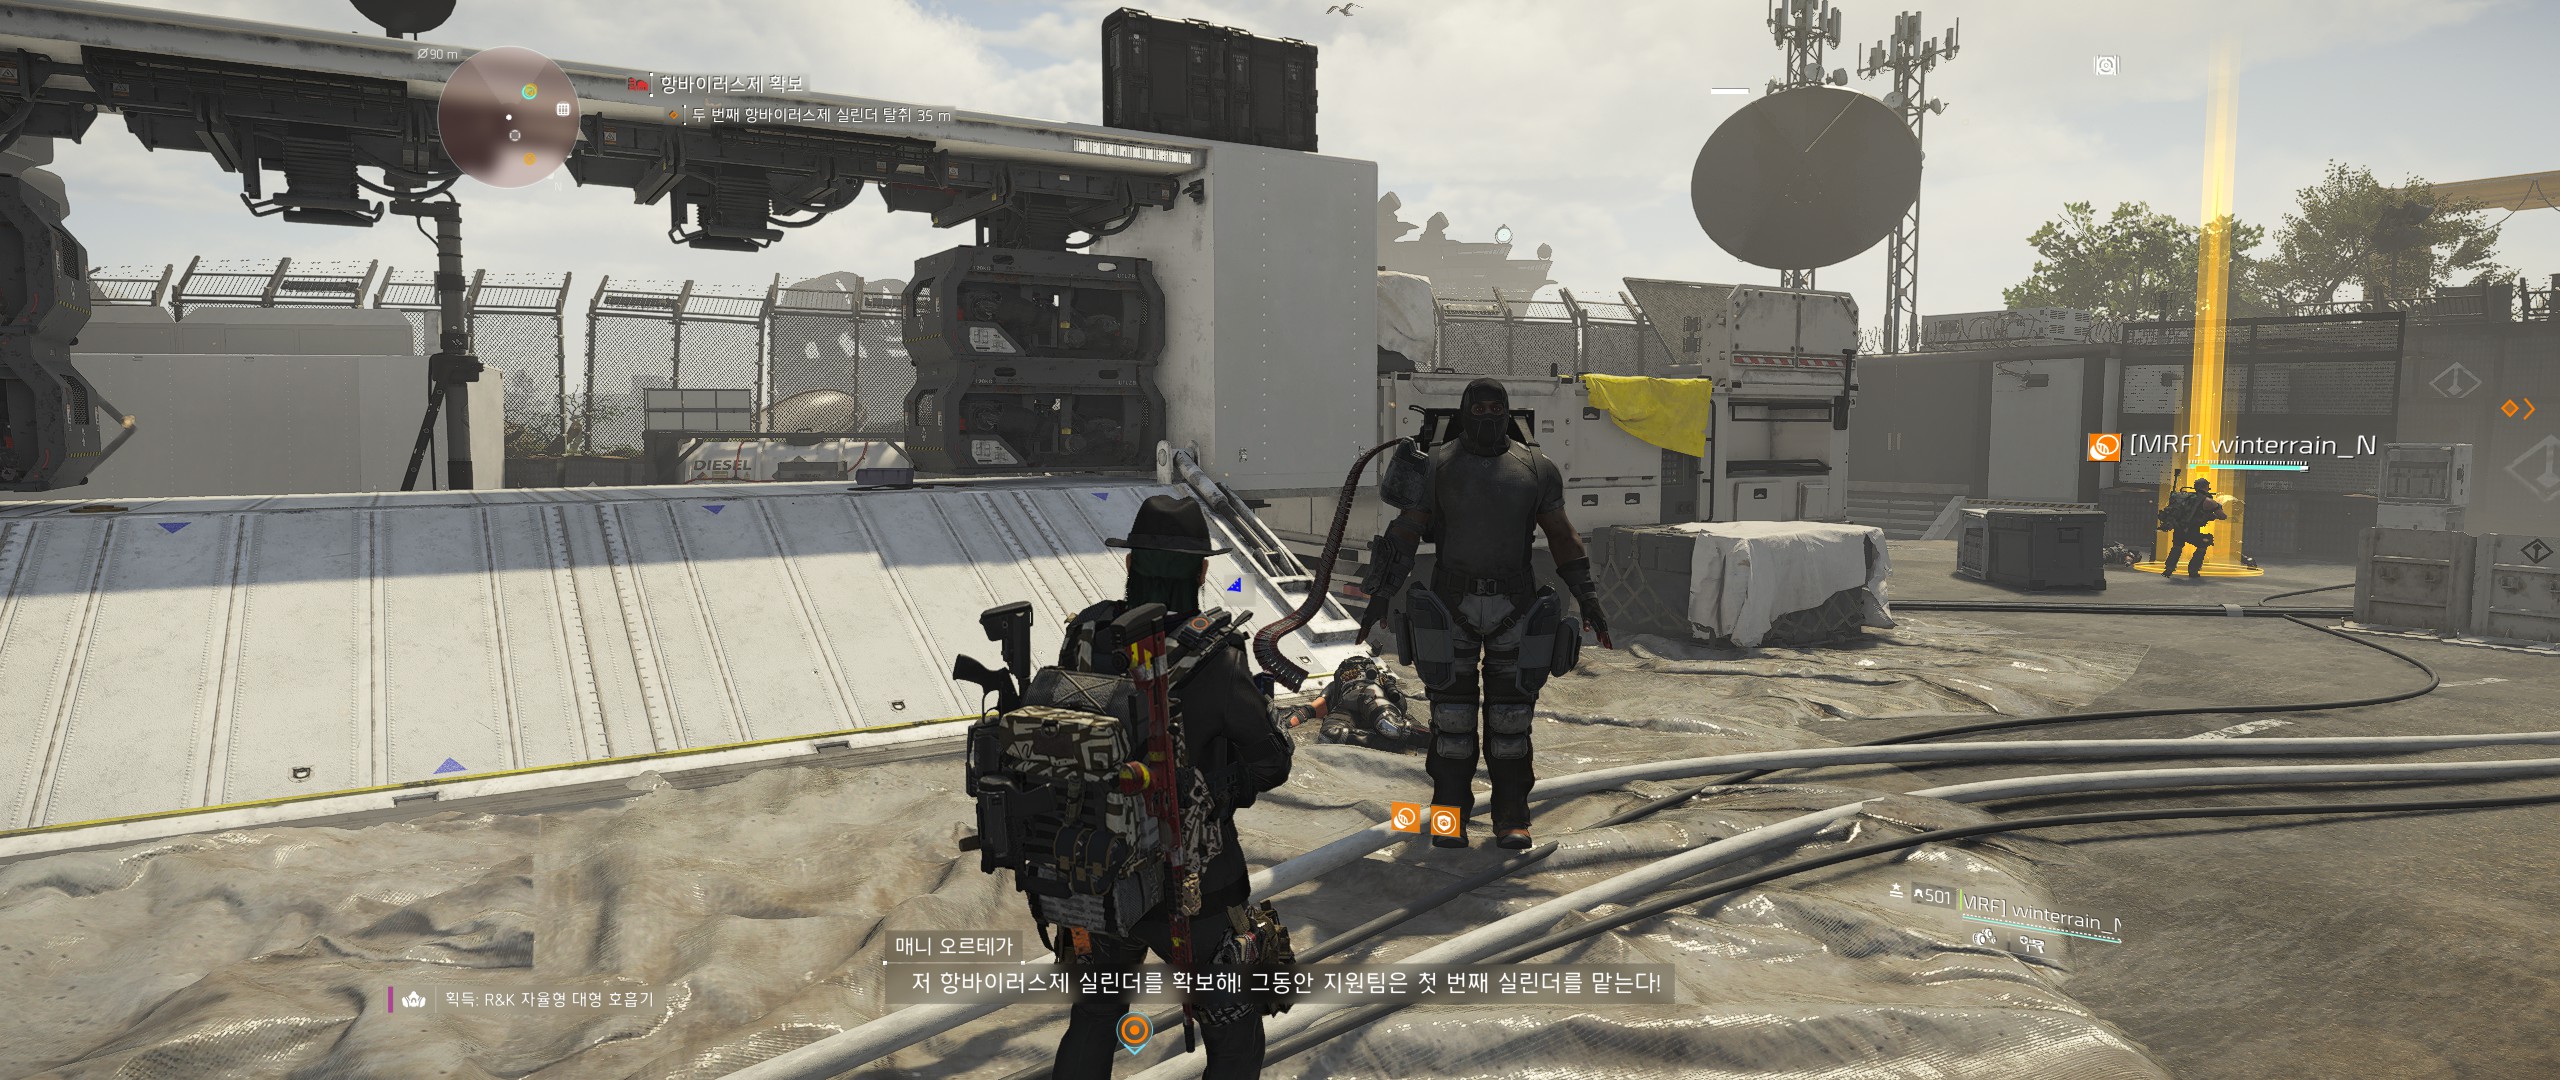 Tom Clancy's The Division® 22019-4-8-0-8-53.jpg